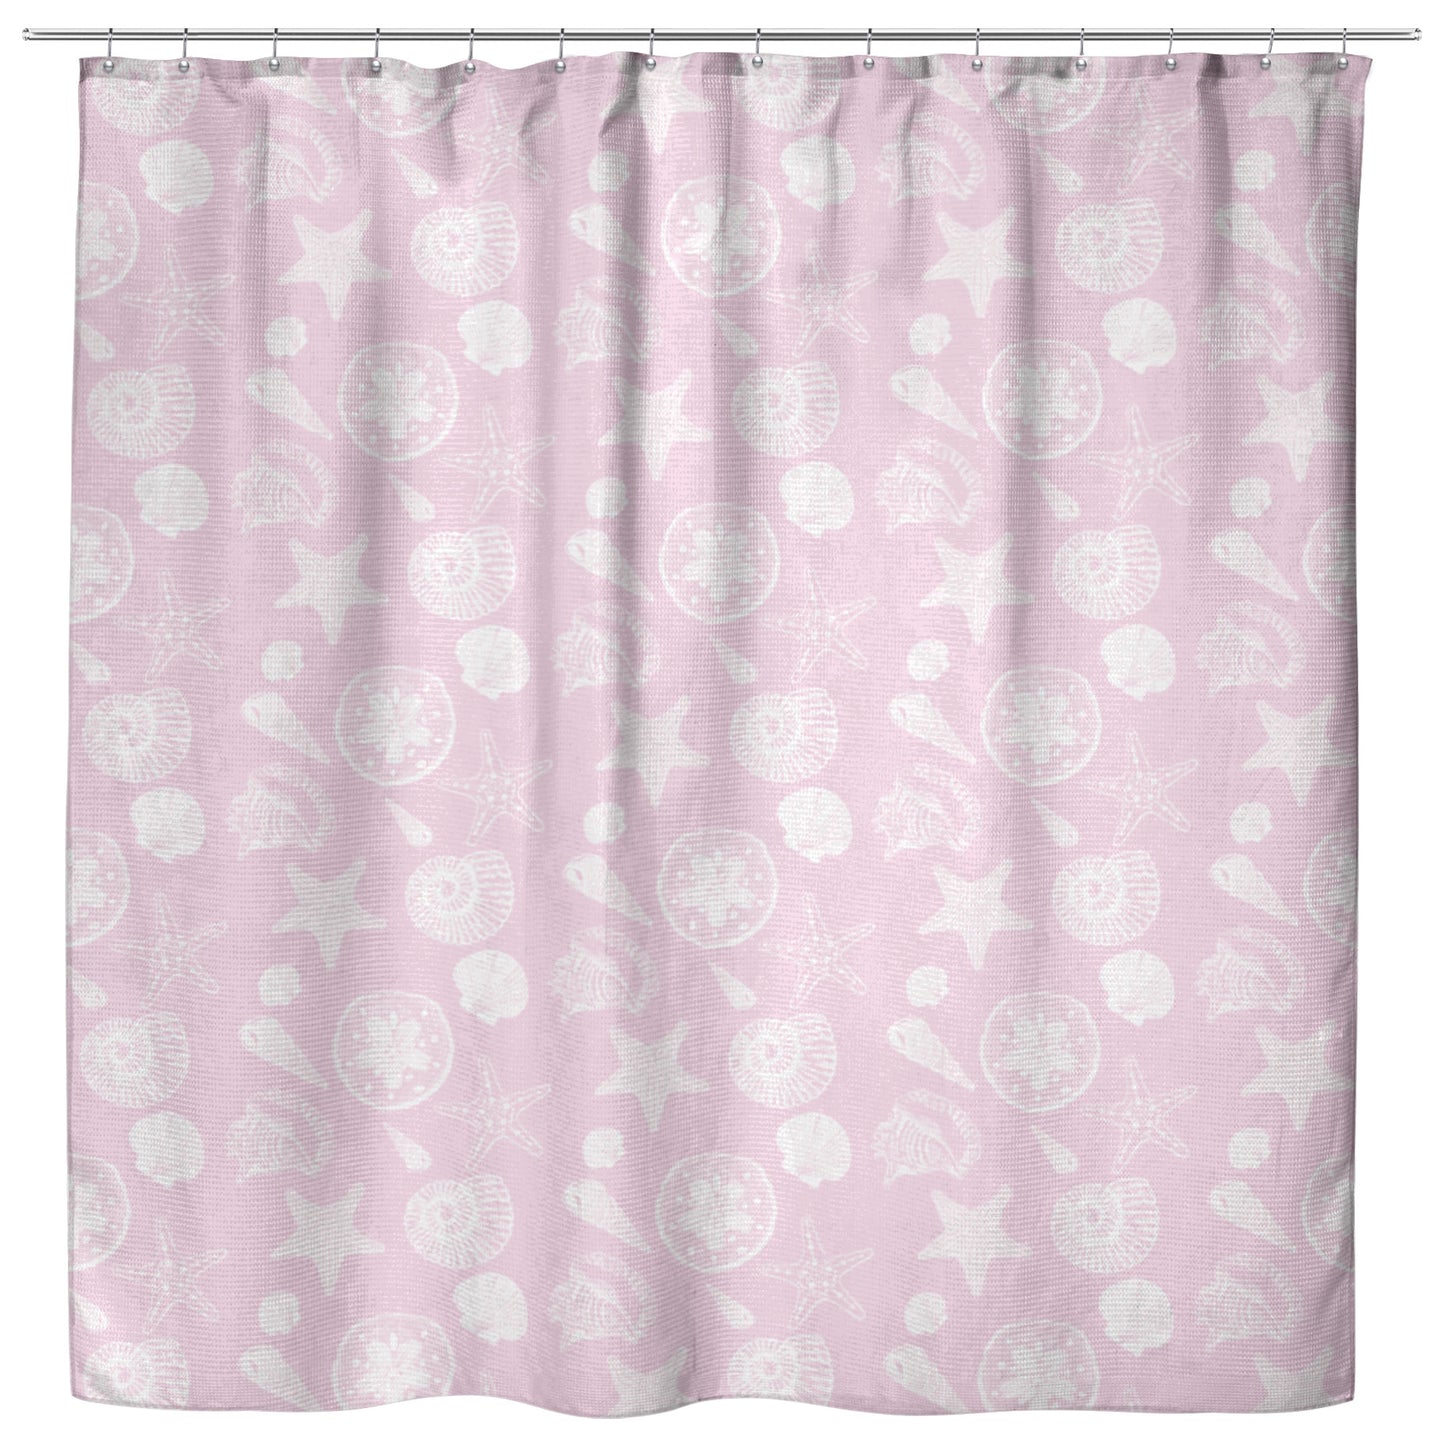 Seashell Sketches on Pink Background, Shower Curtain